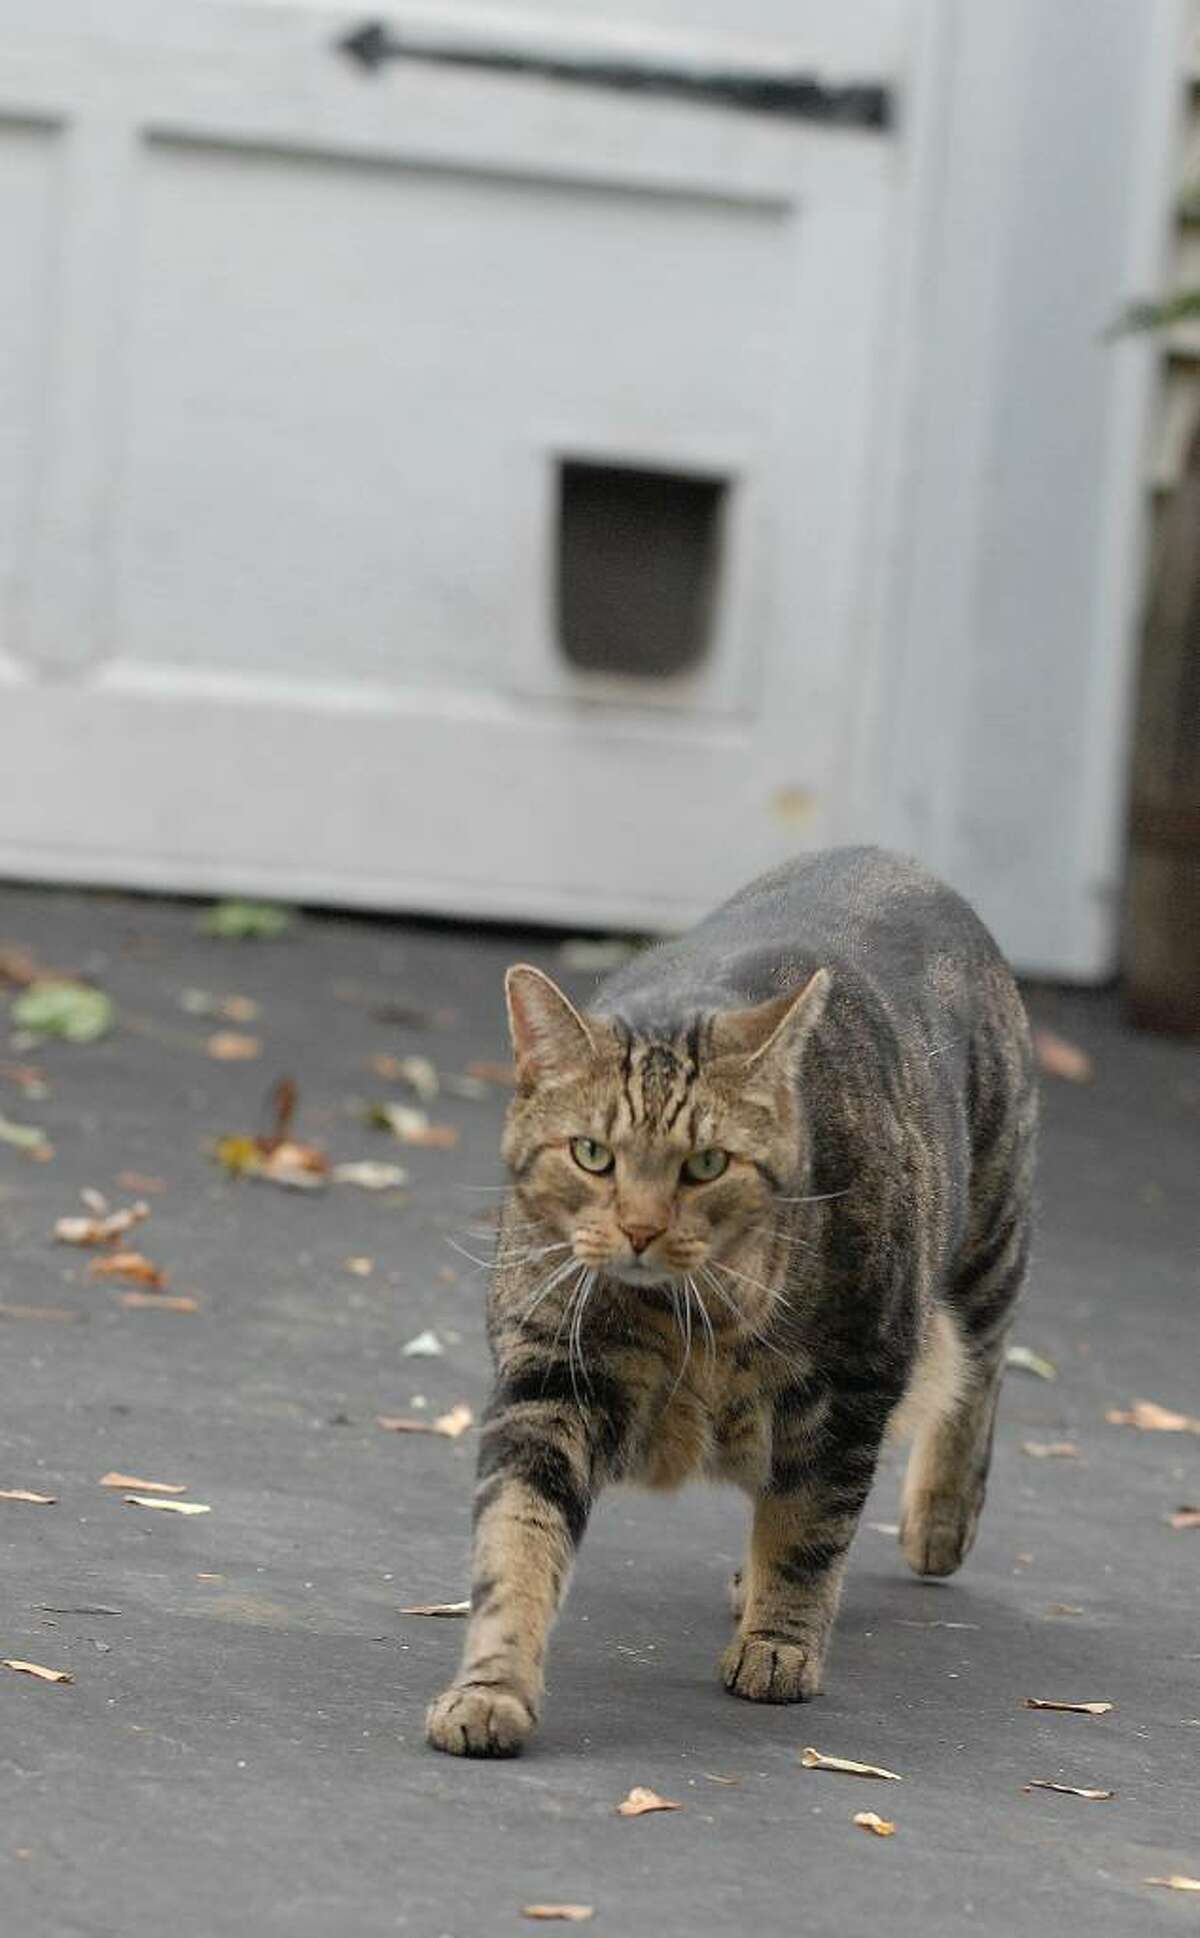 Wandering cats often leave urine and waste in neighbors' yards, a petition for a ban notes. (Lori Van Buren / Times Union)